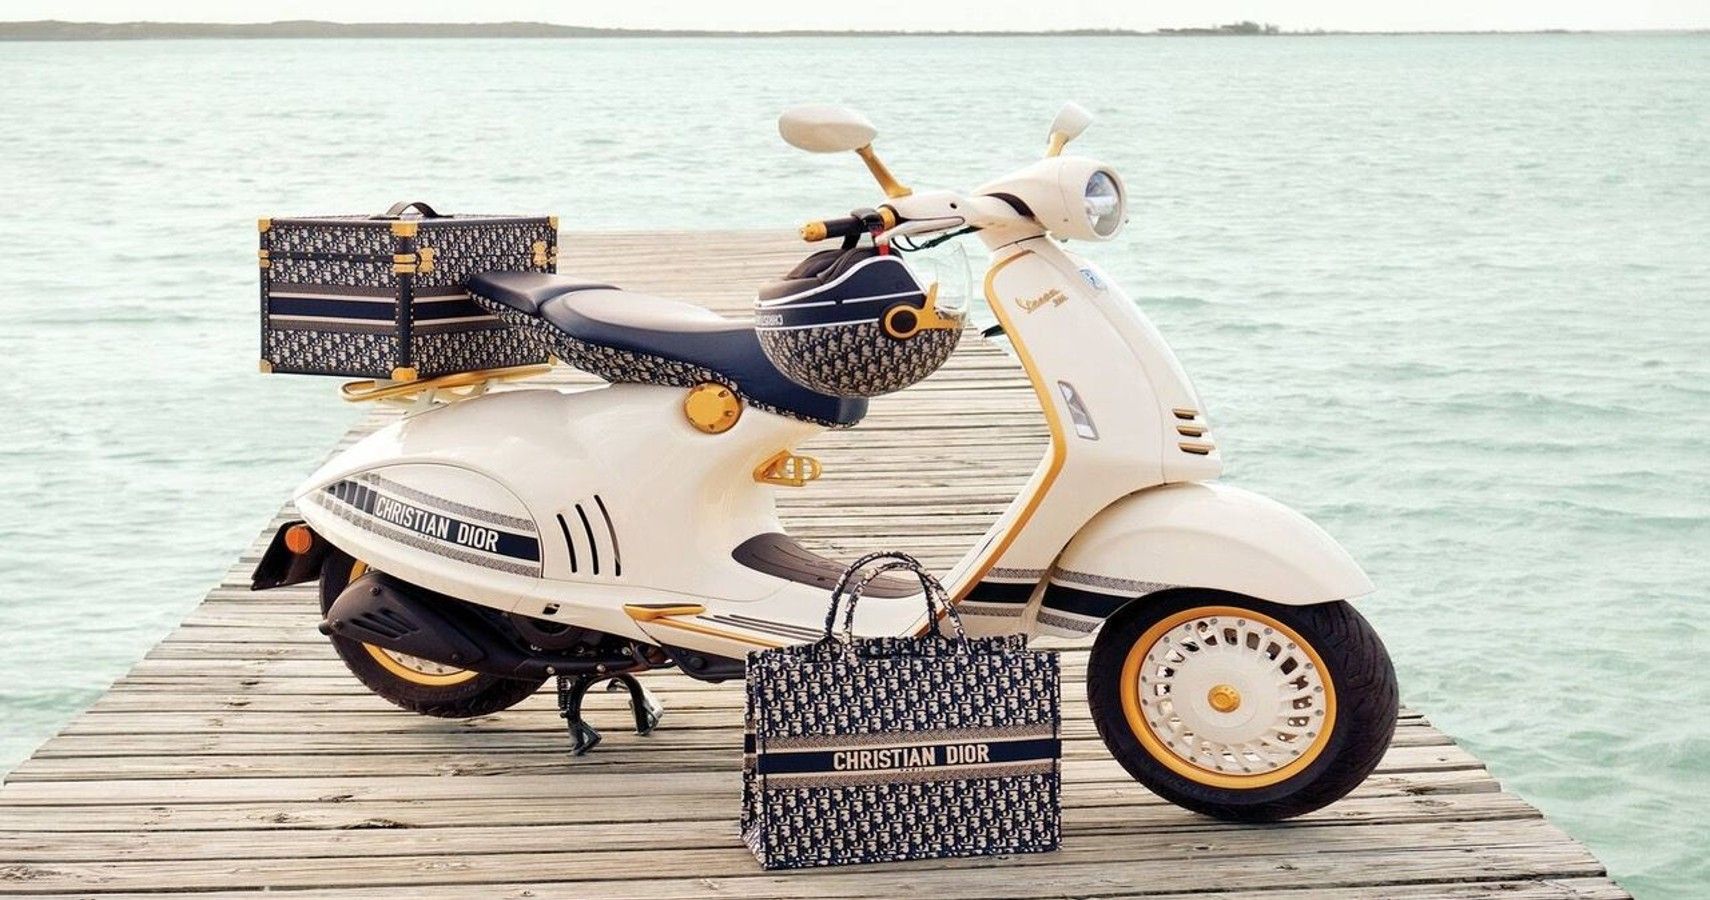 Here's The Lowdown On The Incredible Collaboration Between Dior And Vespa